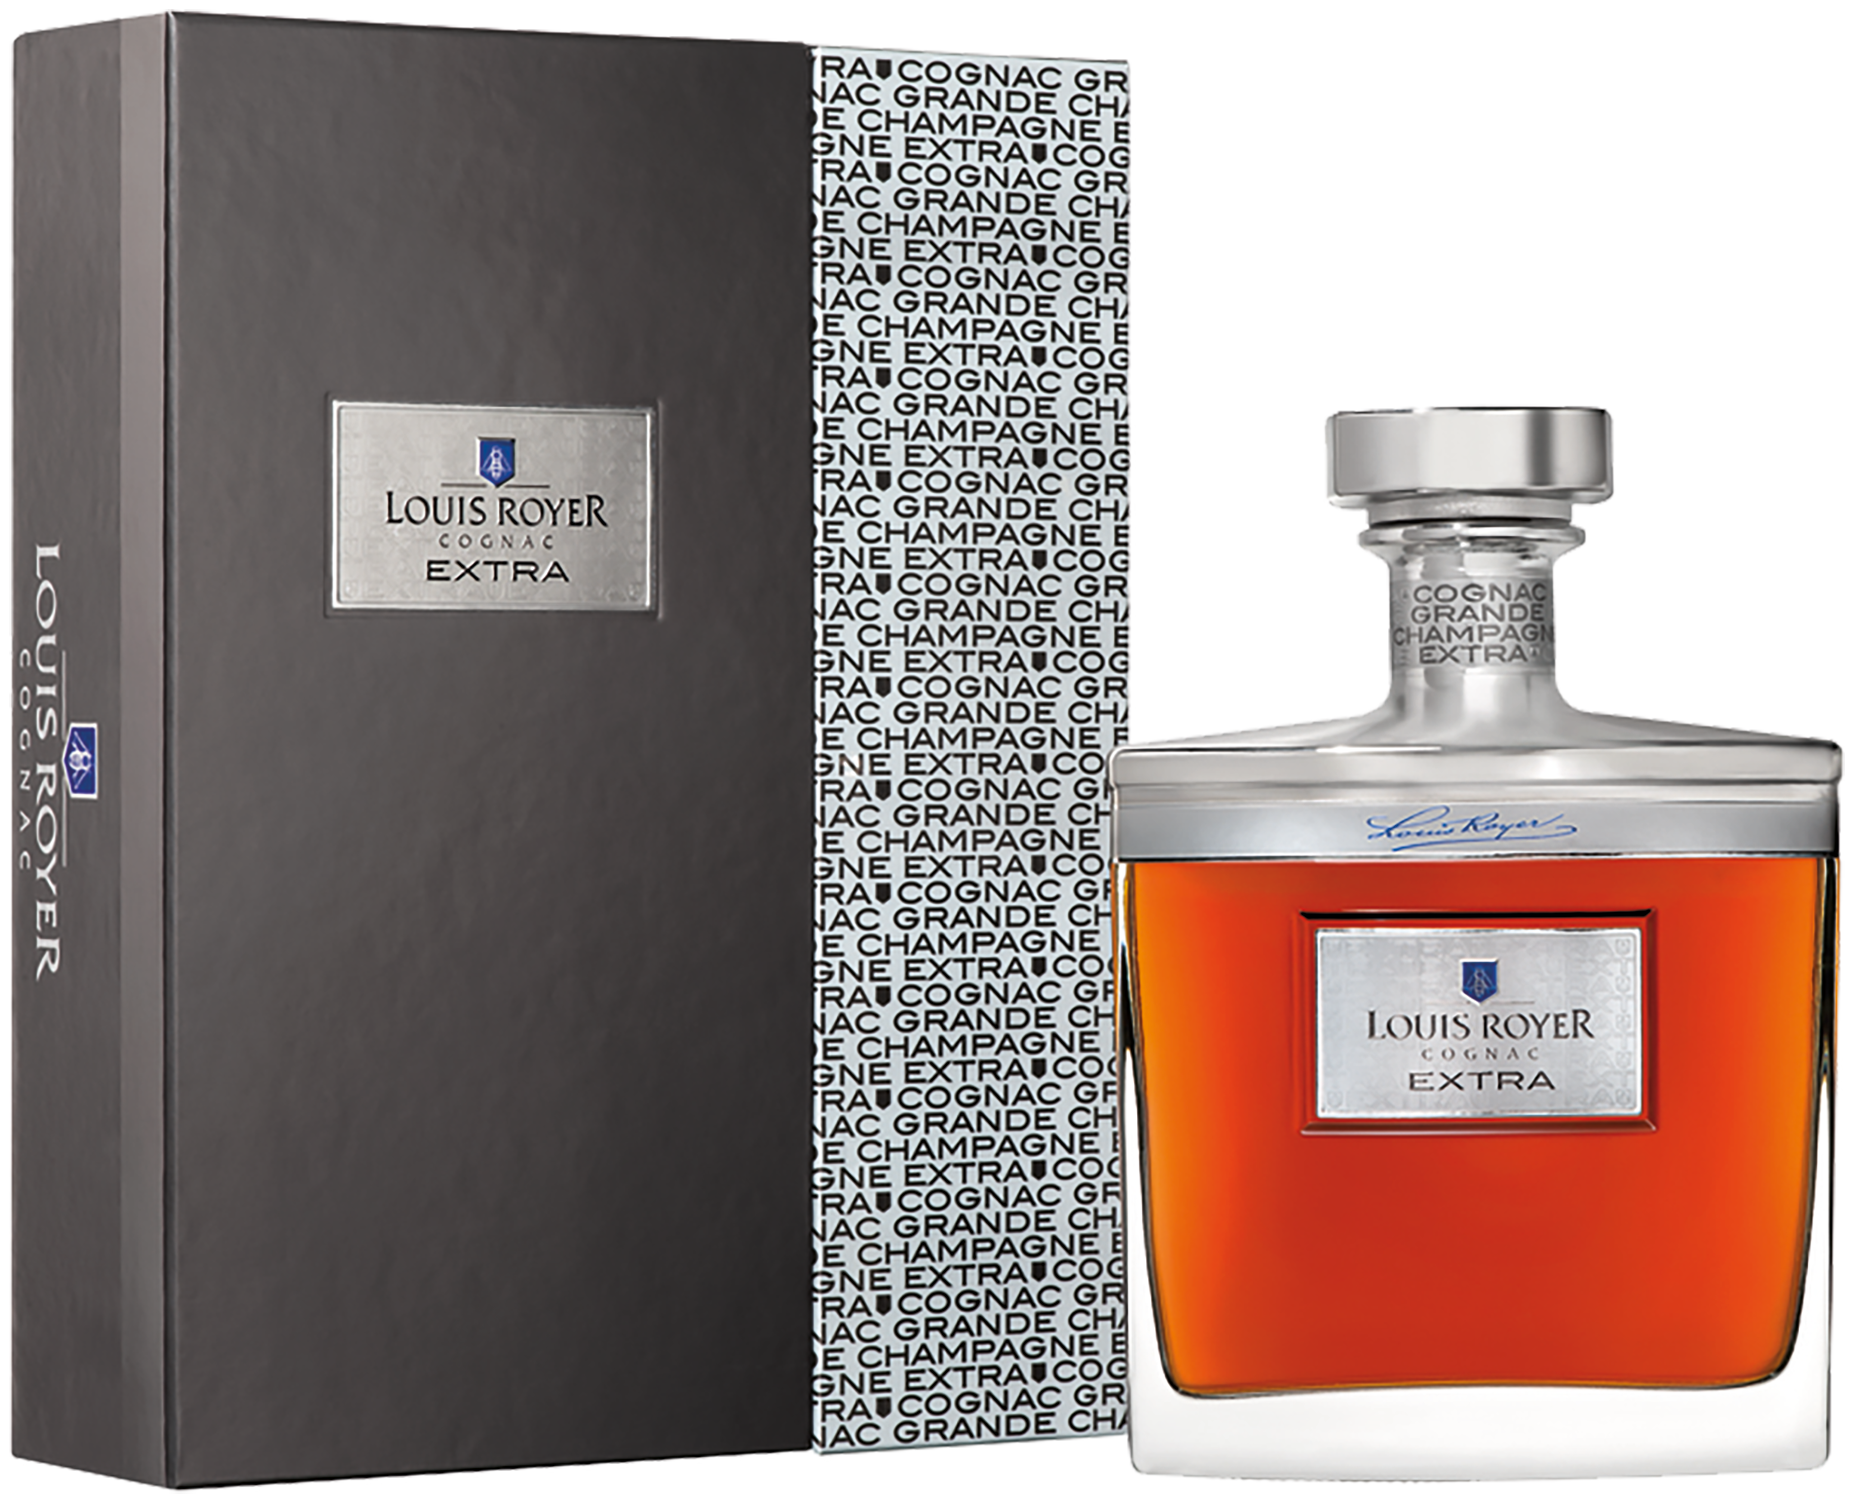 Louis Royer Cognac Grande Champagne Extra (gift box) roullet cognac vs grande champagne gift box